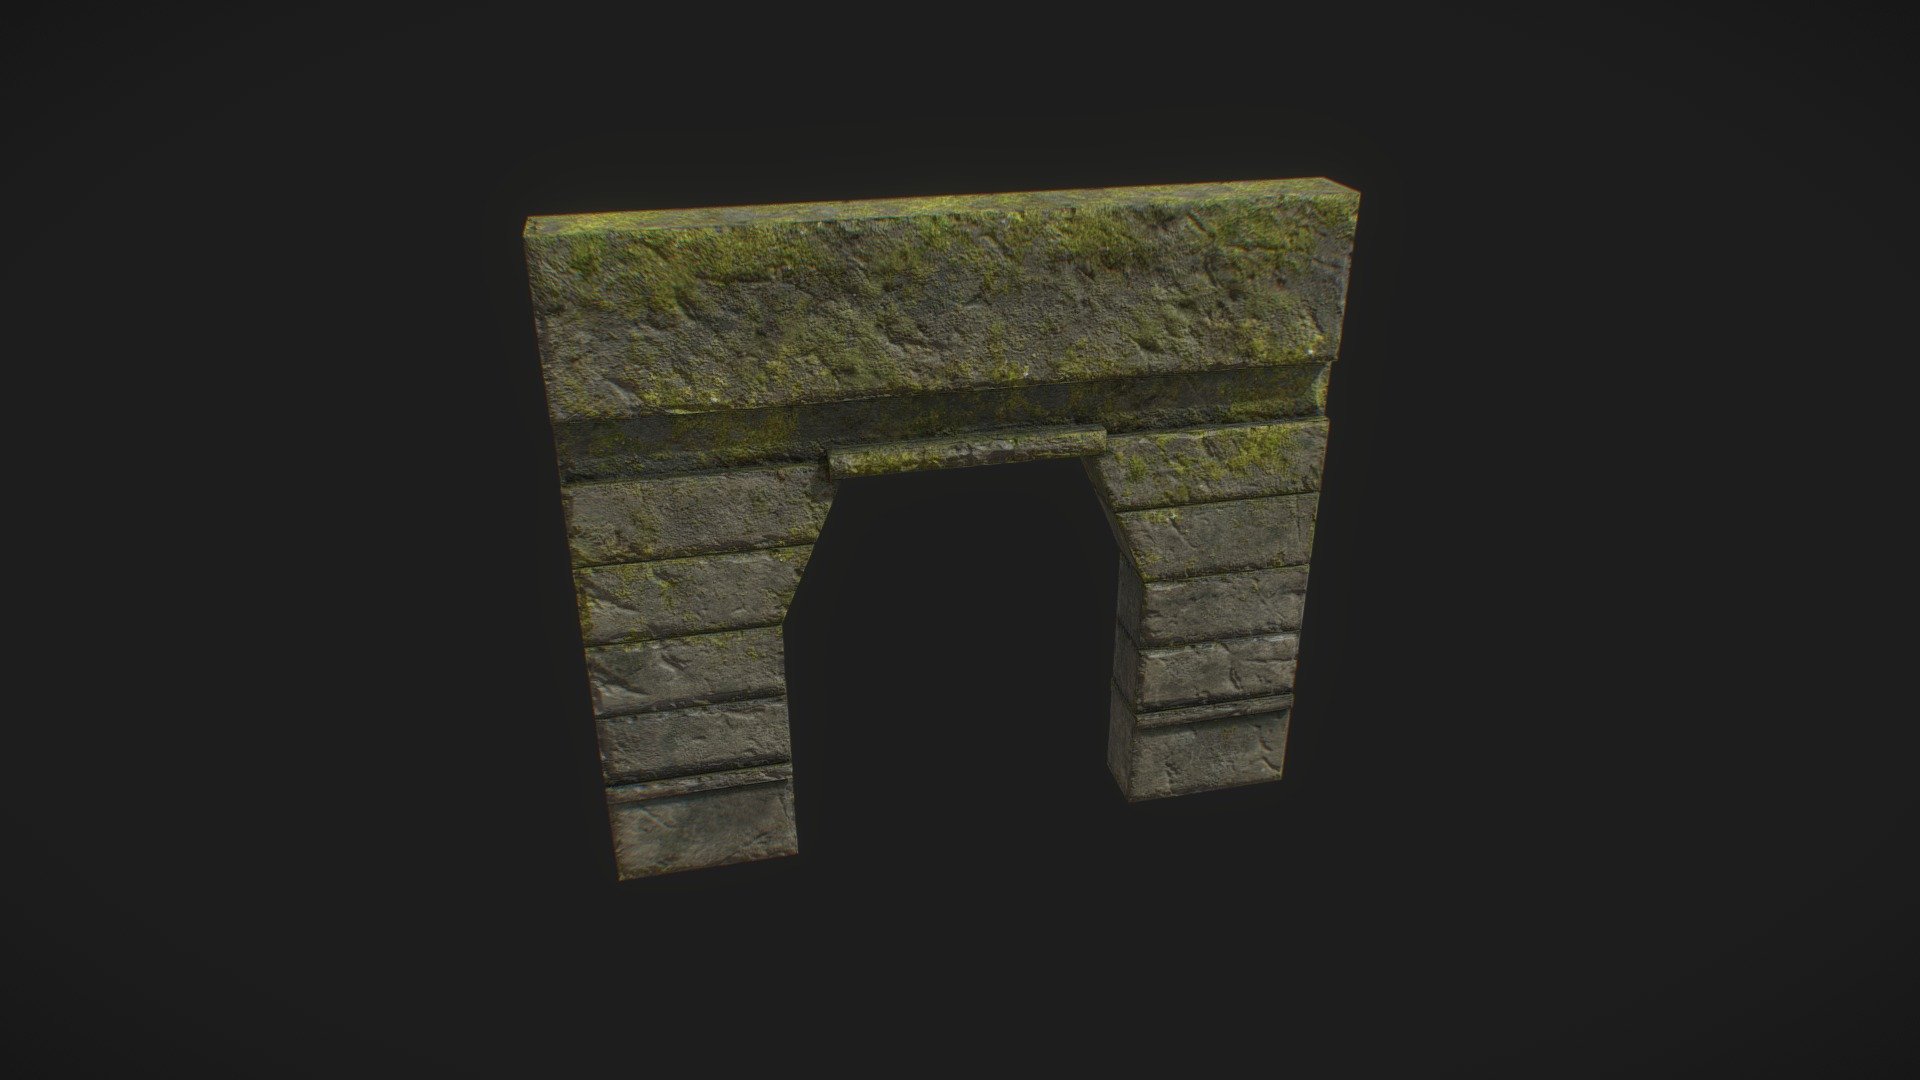 Mayan Arch Gateway 

Game 3D Asset modeled for Mictlan An Ancient Mythical Tale coming soon on kickstarter 

Register on Kickstarter to be alerted when our game is launched 
https://www.kickstarter.com/projects/mictlanthegame/micltan-the-video-game

Wishlist on Steam 
https://store.steampowered.com/app/1411900/Mictlan_An_Ancient_Mythical_Tale/?beta=1

Follow our Social Media Channels:

Instagram.com/mictlanthegame
Facebook.com/mictlanthegame
Twitter.com/mictlanthegame
Instagram.com/future_vizion - Mayan Arch Gateway - 3D model by Micltan: The Game -  An Ancient Mythical Tale (@micltanthegame) 3d model